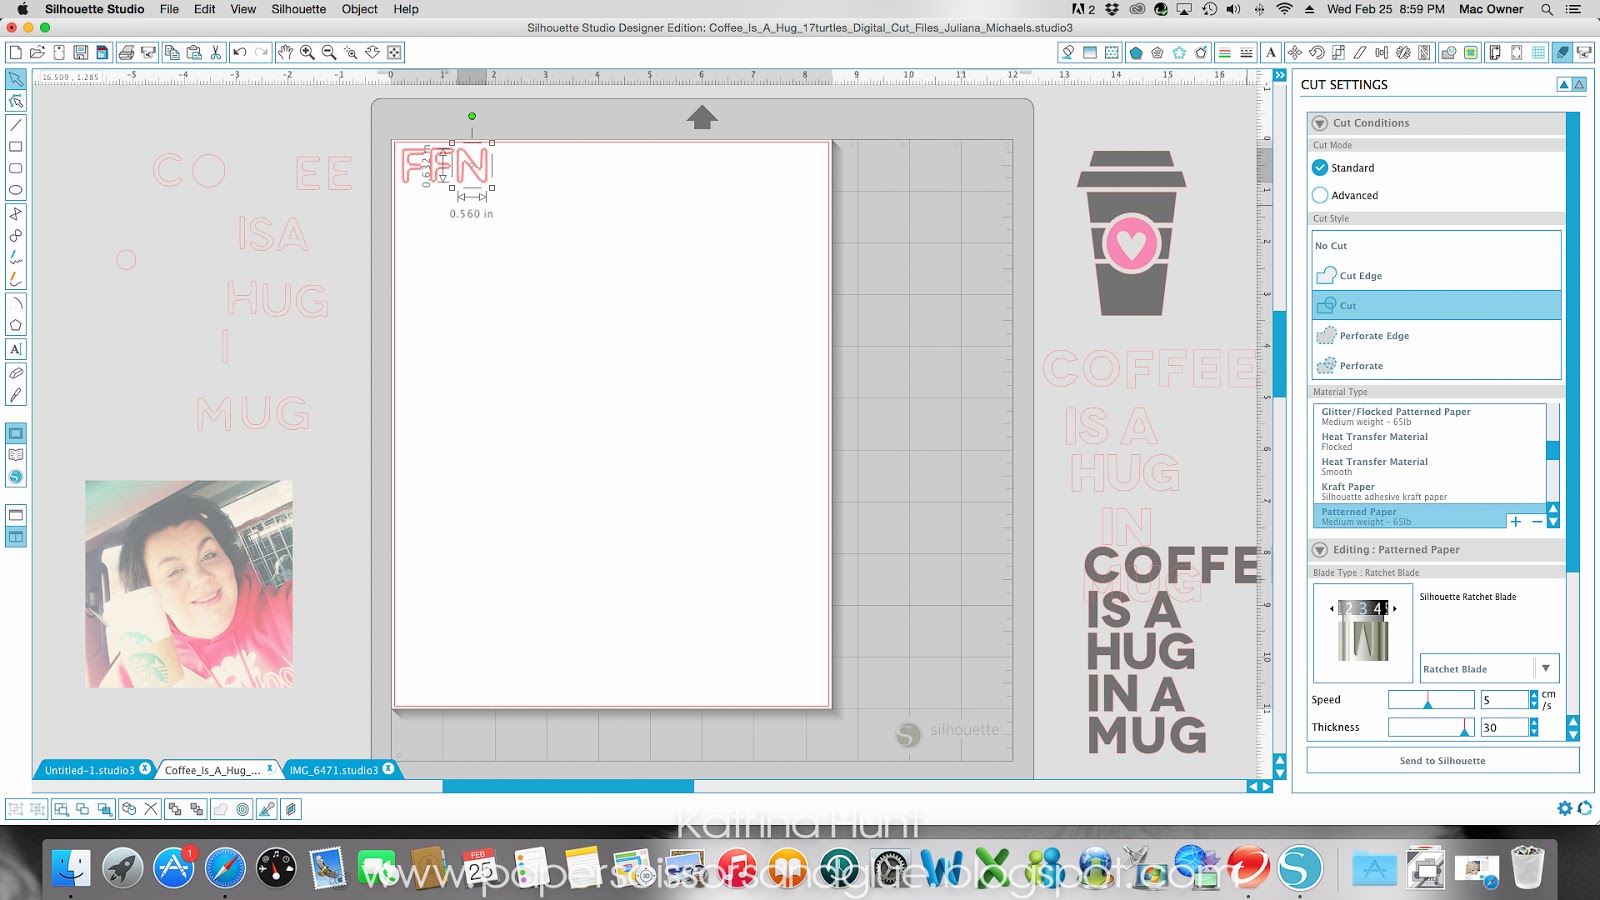 Coffee Is A Hug In A Mug Scrapbook Page and Silhouette Sketch Pen Tracing Tutorial by Katrina Hunt featuring 17turtles Digital Cut Files